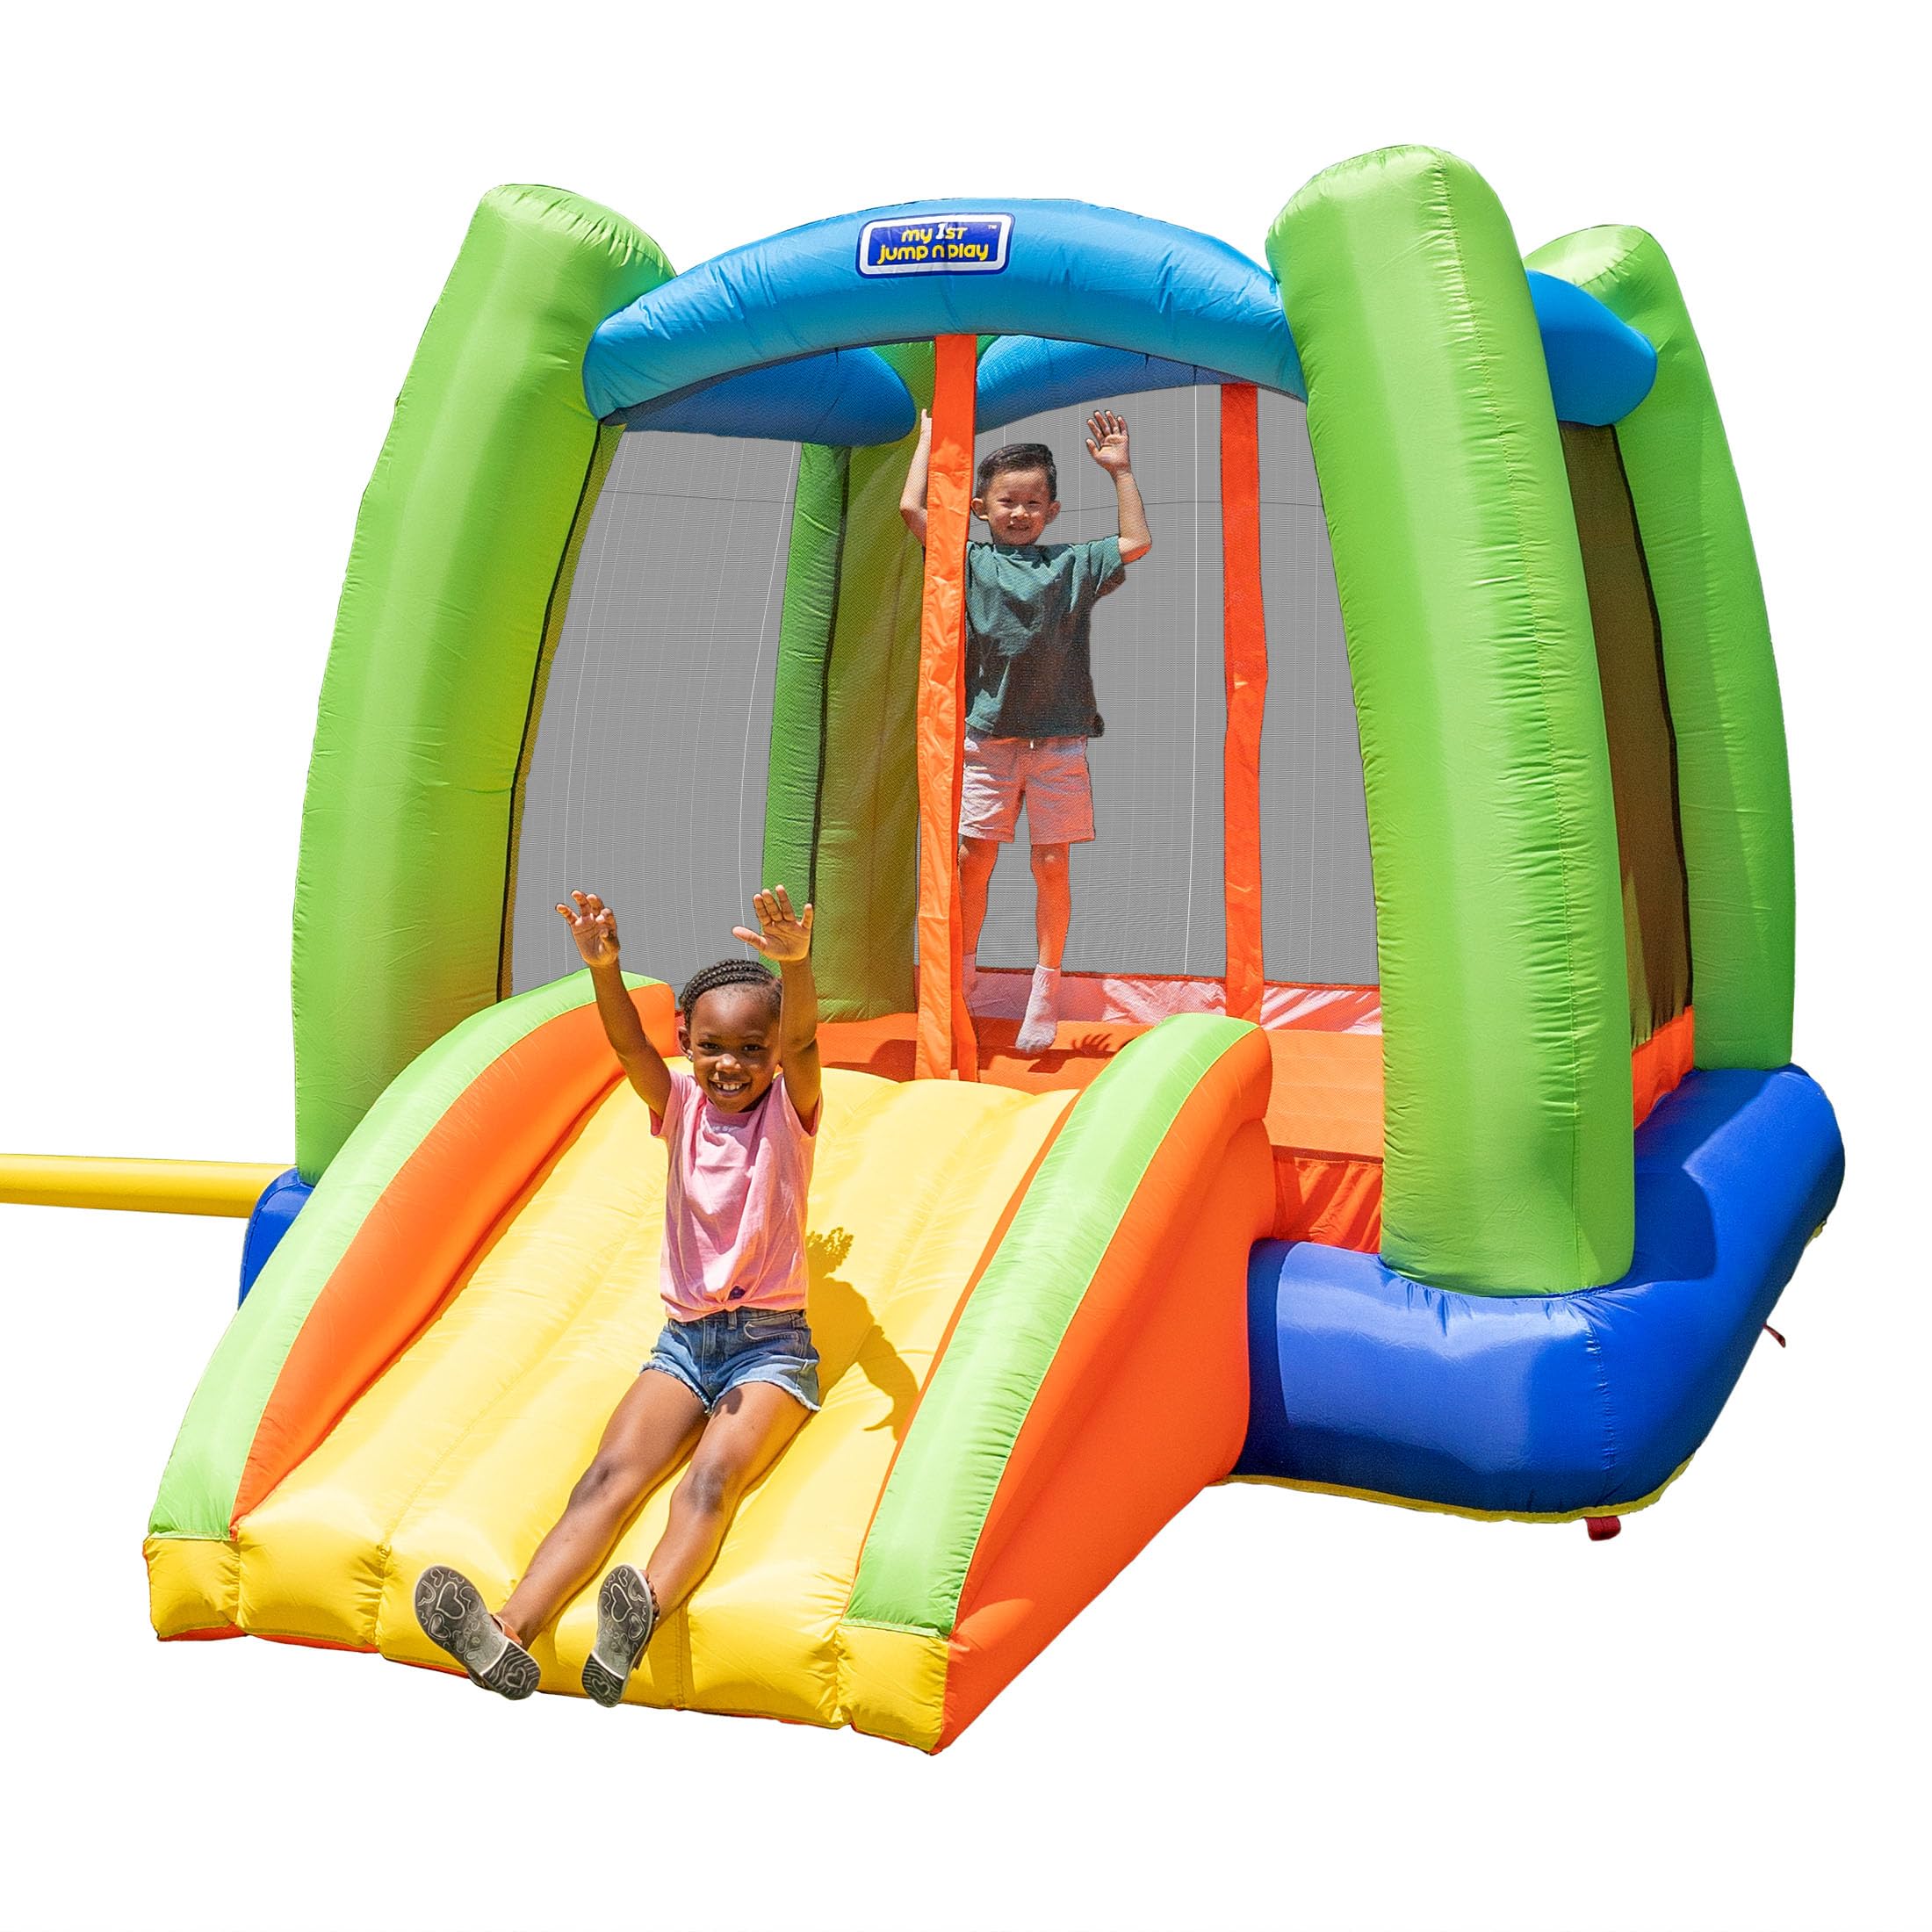 Sportspower My First Jump N' Play Bounce House with Slide,Multi-Color,144